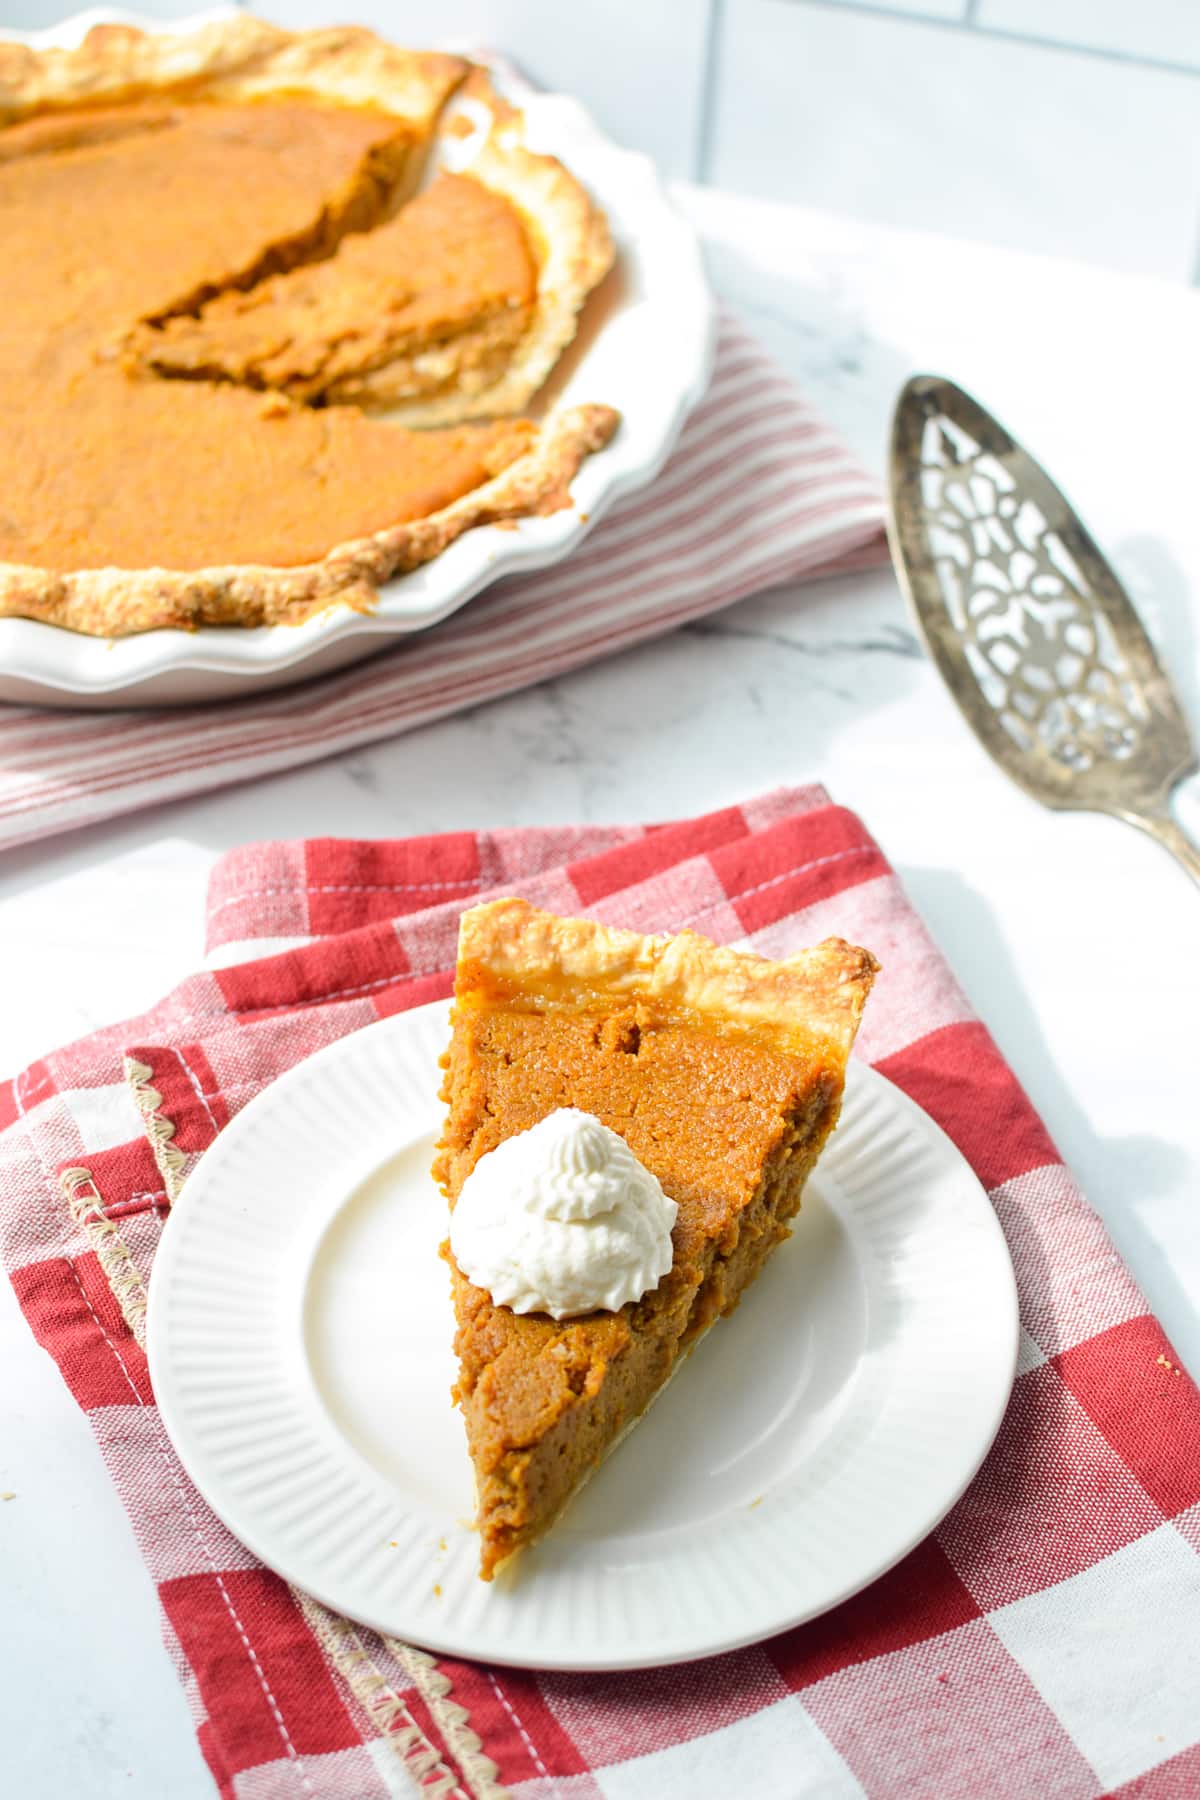 A slice of pumpkin pie with whipped cream, with a pie in the background.